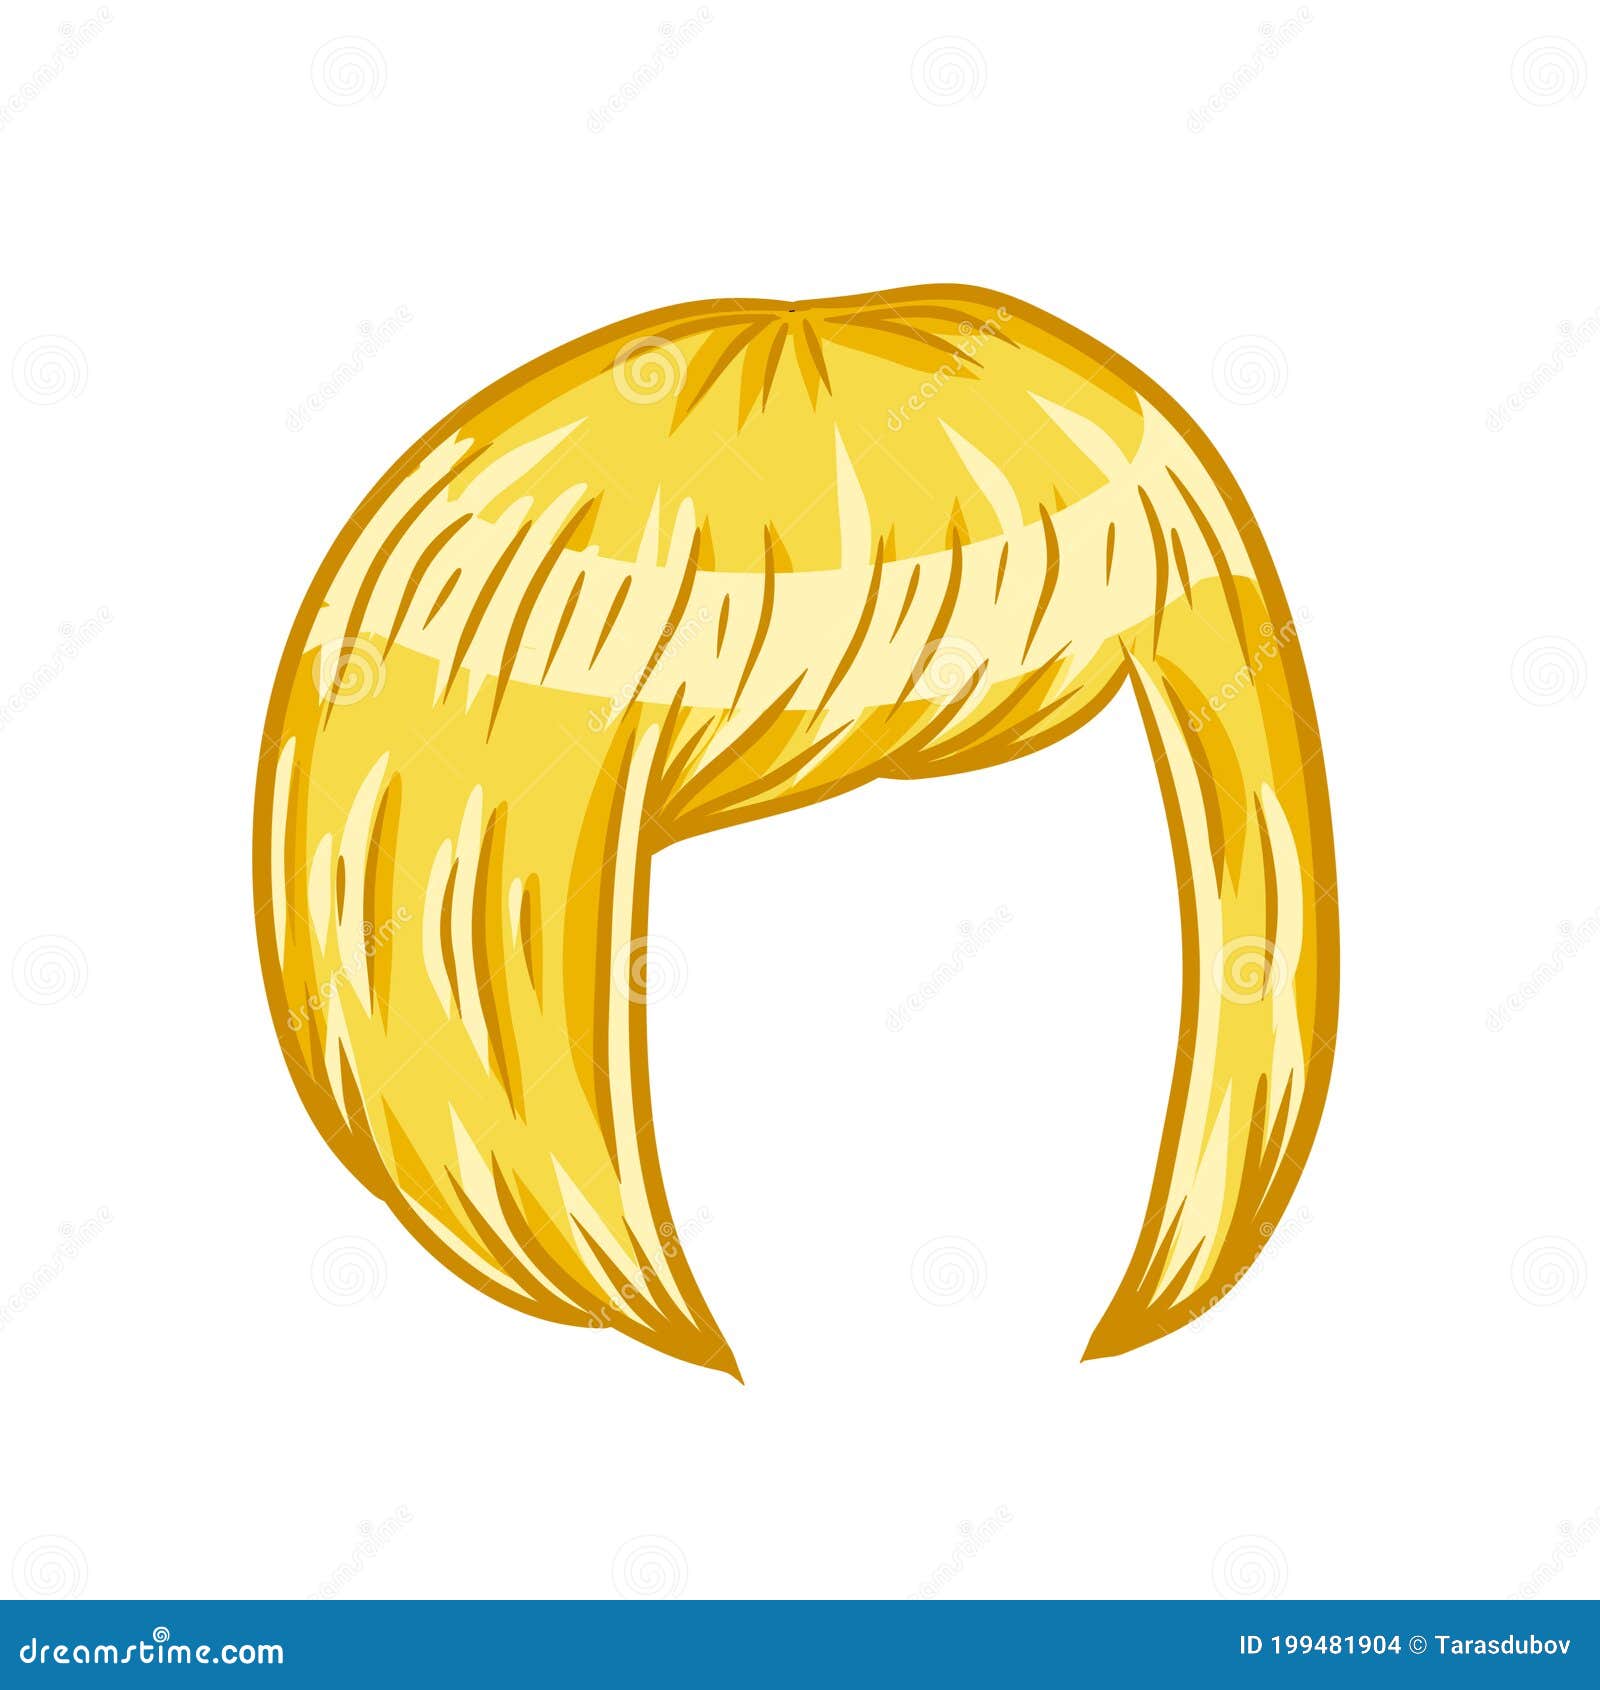 Women Hairstyle. Blonde Hair on the Head. Trendy Modern Haircuts Girl - Bob  Cut. Sketch Color Cartoon Illustration Stock Vector - Illustration of  design, blonde: 199481904